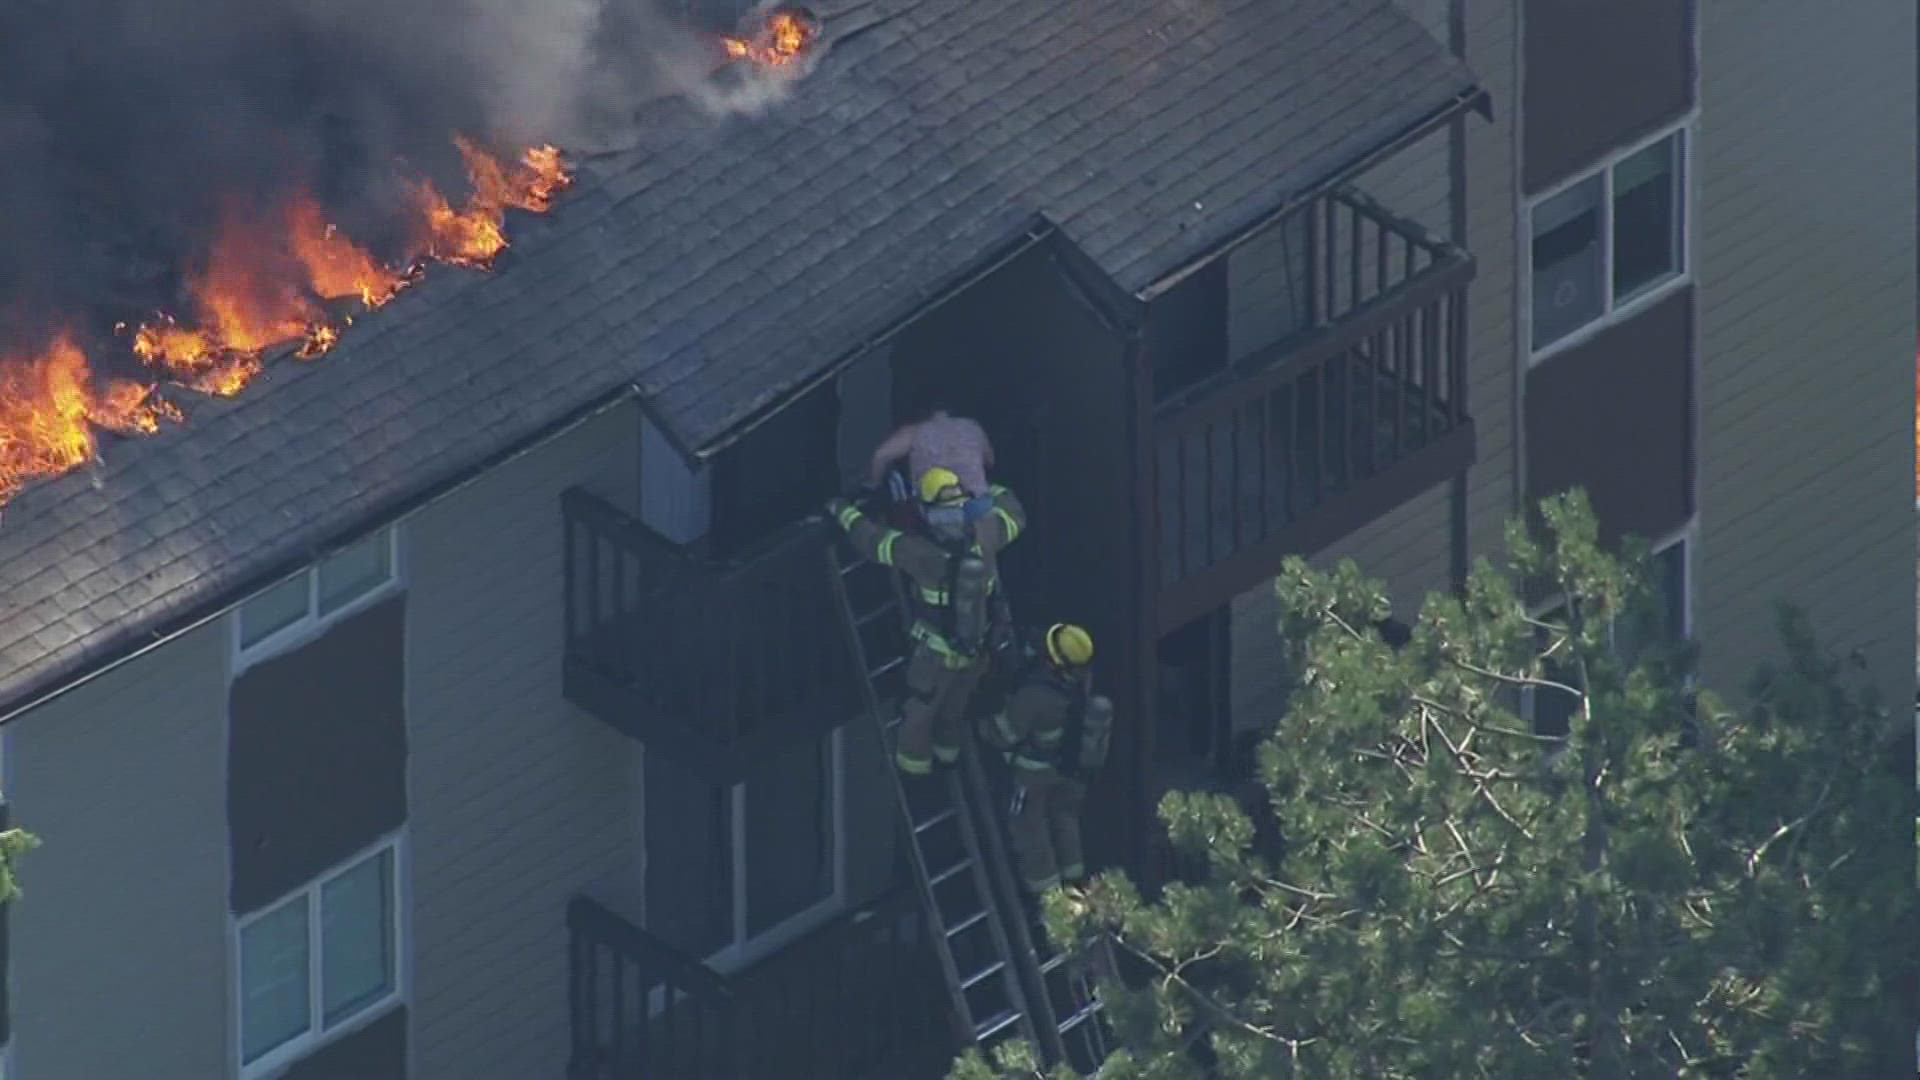 Firefighters rescued two people as a three-alarm fire tore through a Federal Way apartment building Wednesday afternoon.